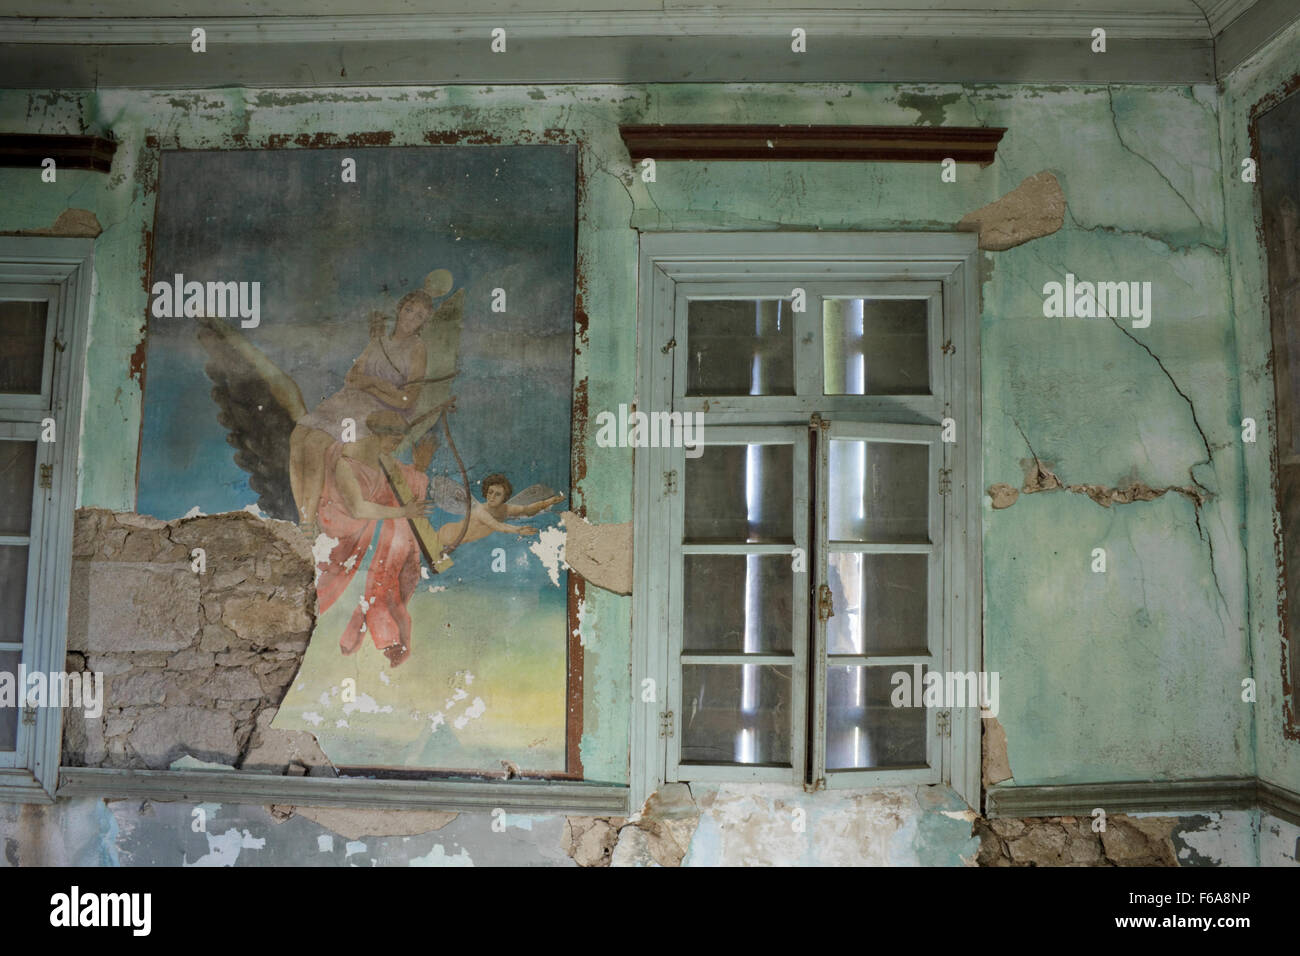 Wide view of the room side with the detached portion from M.Pamamali's sooty wallpainting entitled 'Artemis'. Kontias, Lemnos Stock Photo